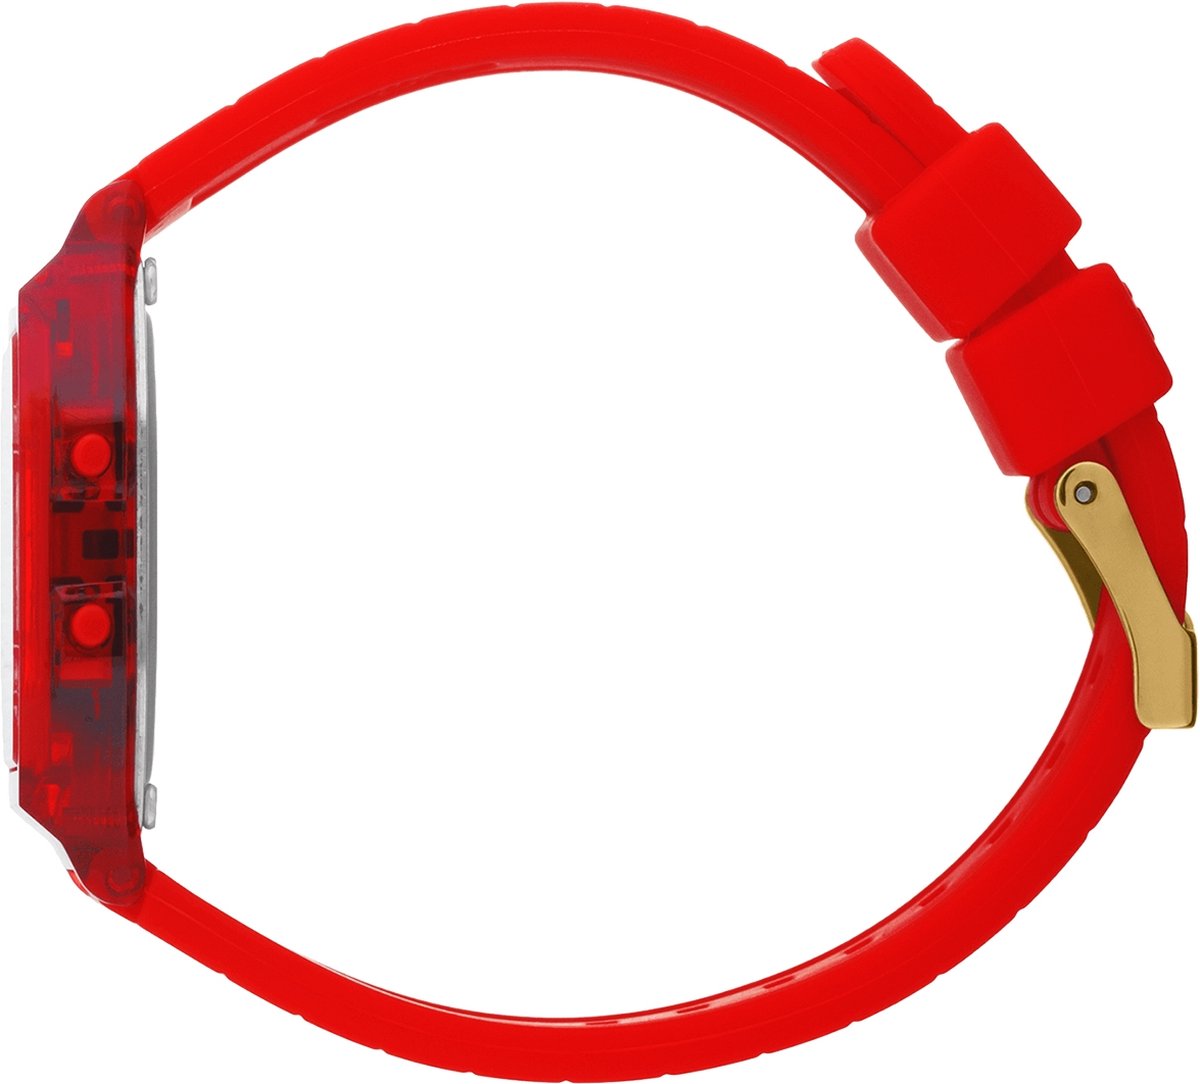 Ice Watch ICE digit retro - Red passion - Clear 022885 Horloge - Siliconen - Rood - Ø 33 mm